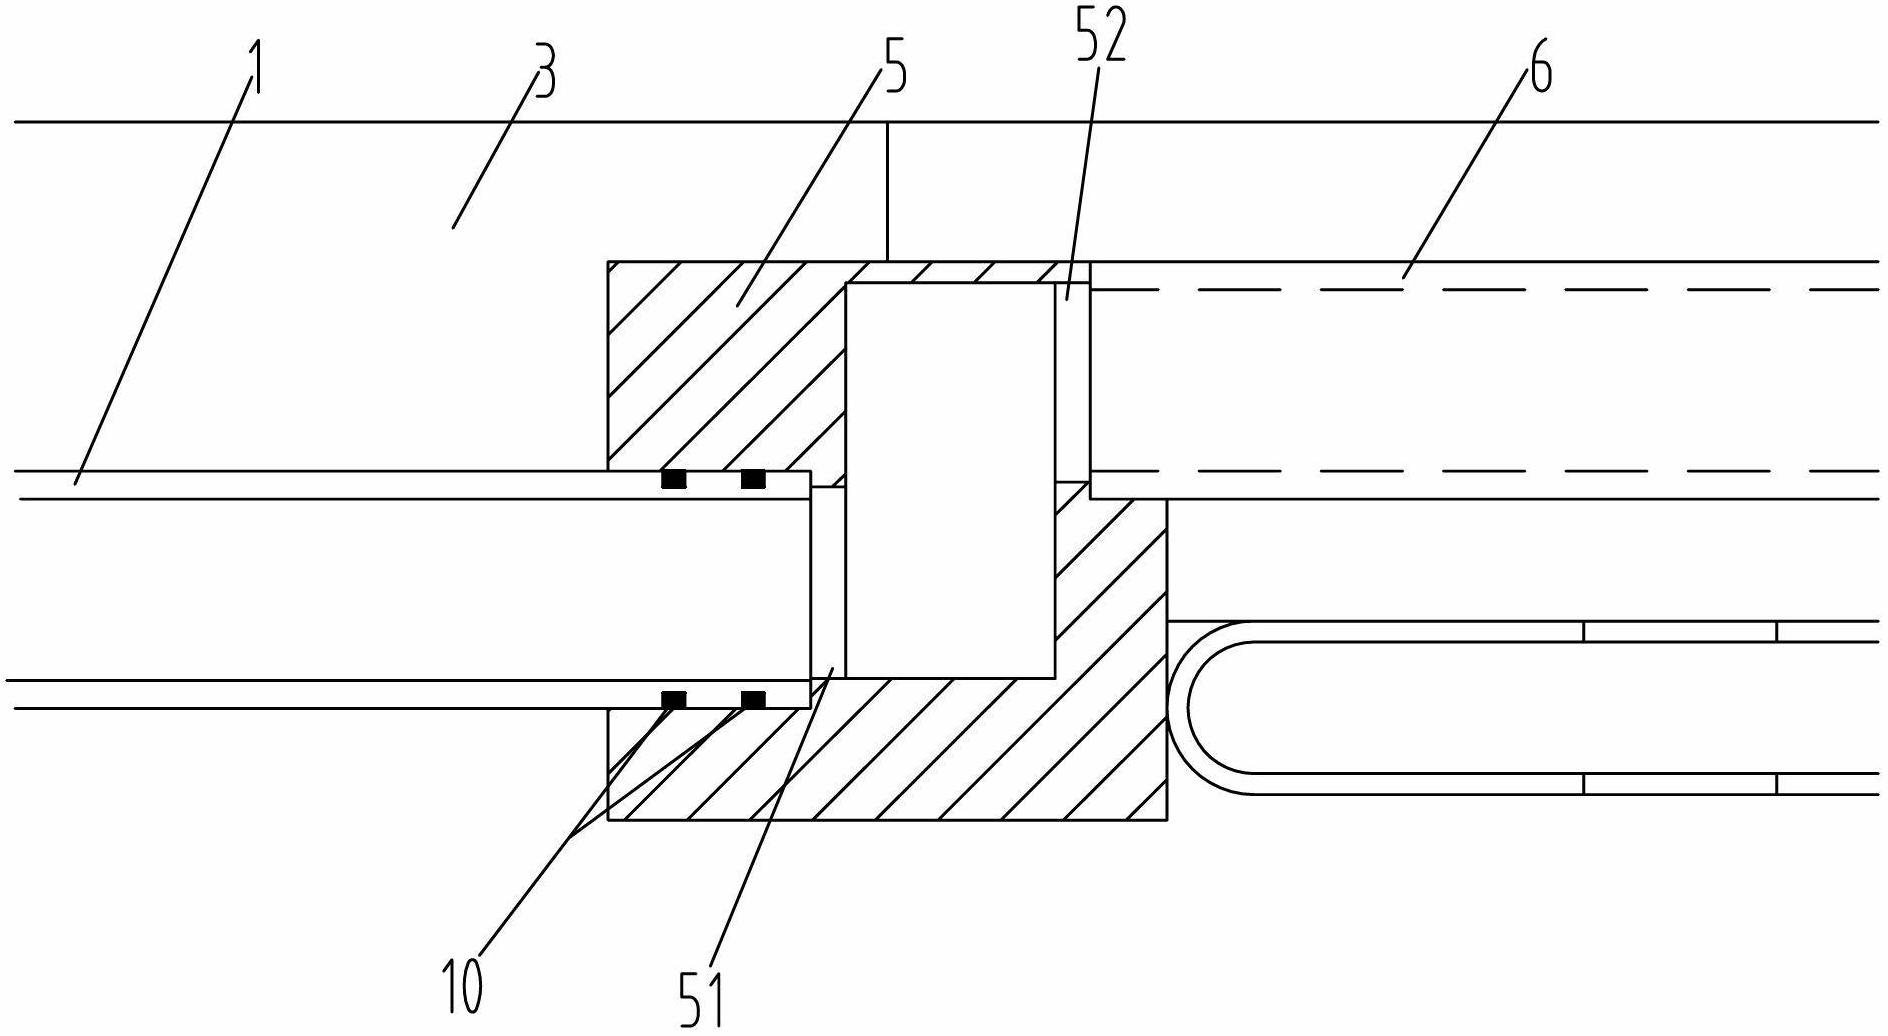 Shield machine synchronous grouting pipeline system and shield machine with same